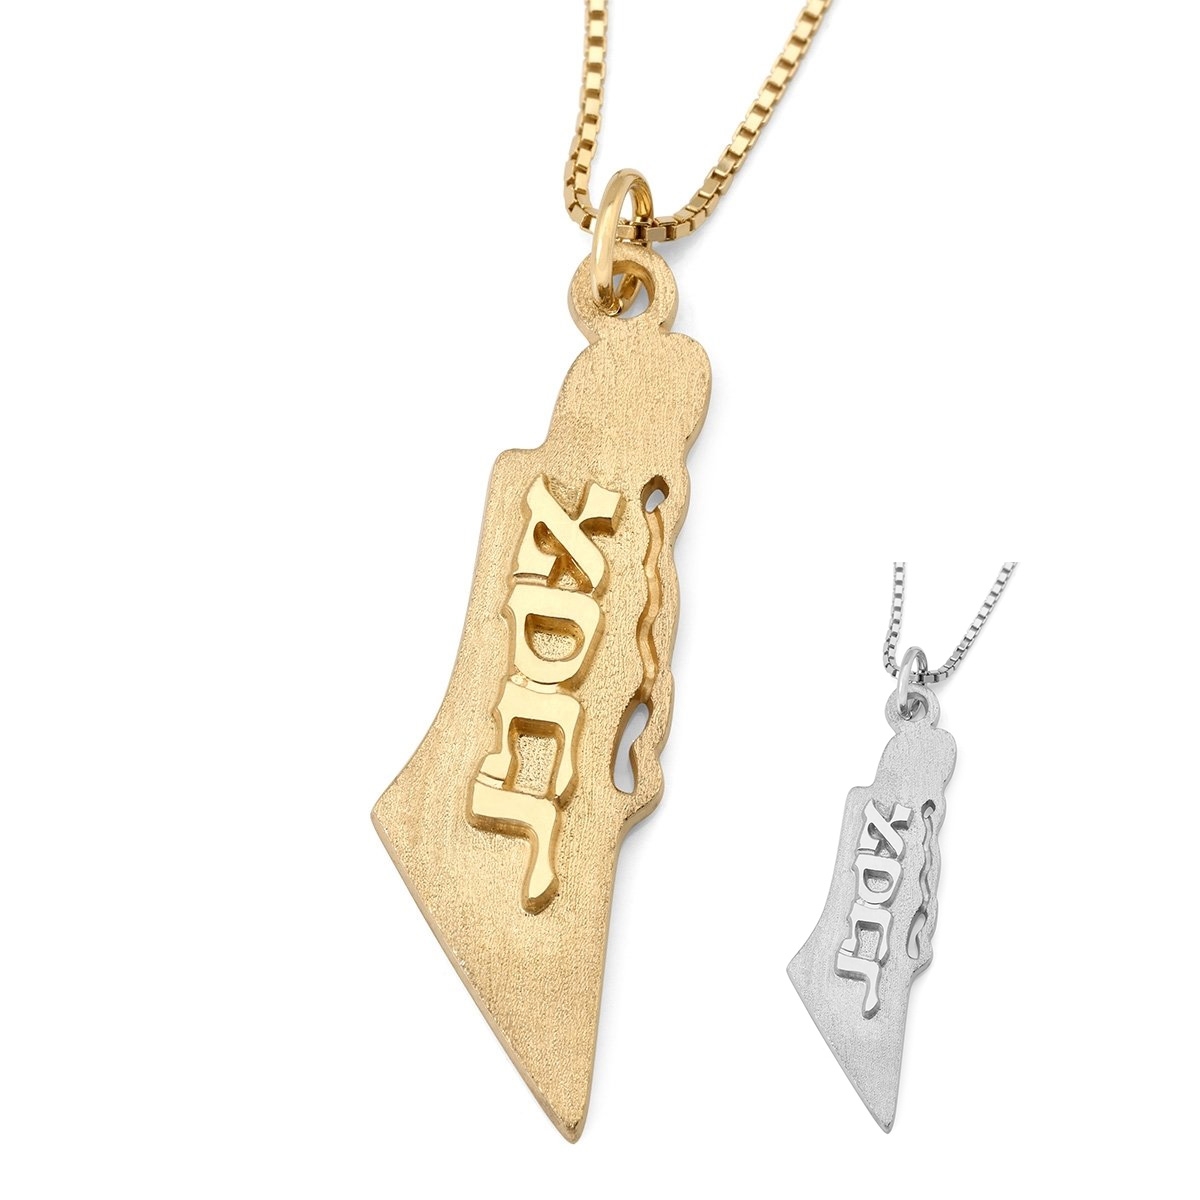 Silver or Gold Plated Map of Israel Name Pendant - Hebrew/English - 10